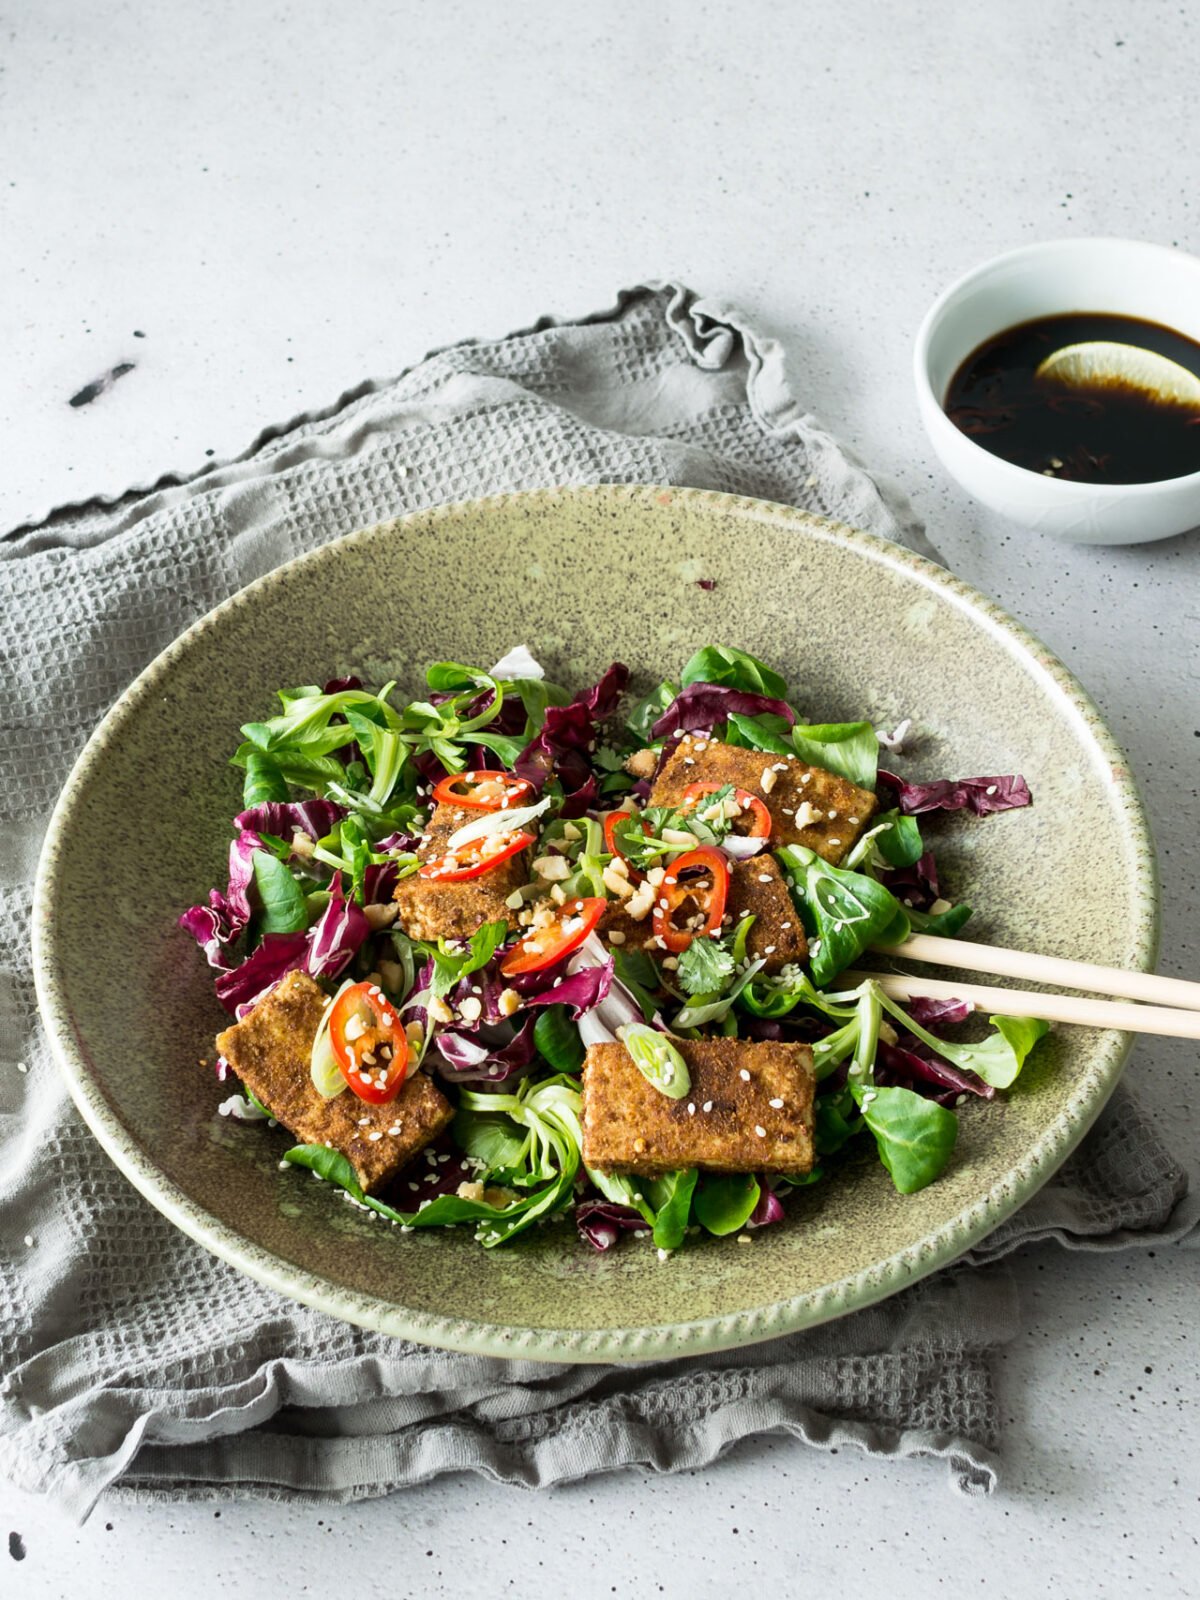 Spicy Tofu Salad with Chili Lime Dressing - Healthy Green Kitchen